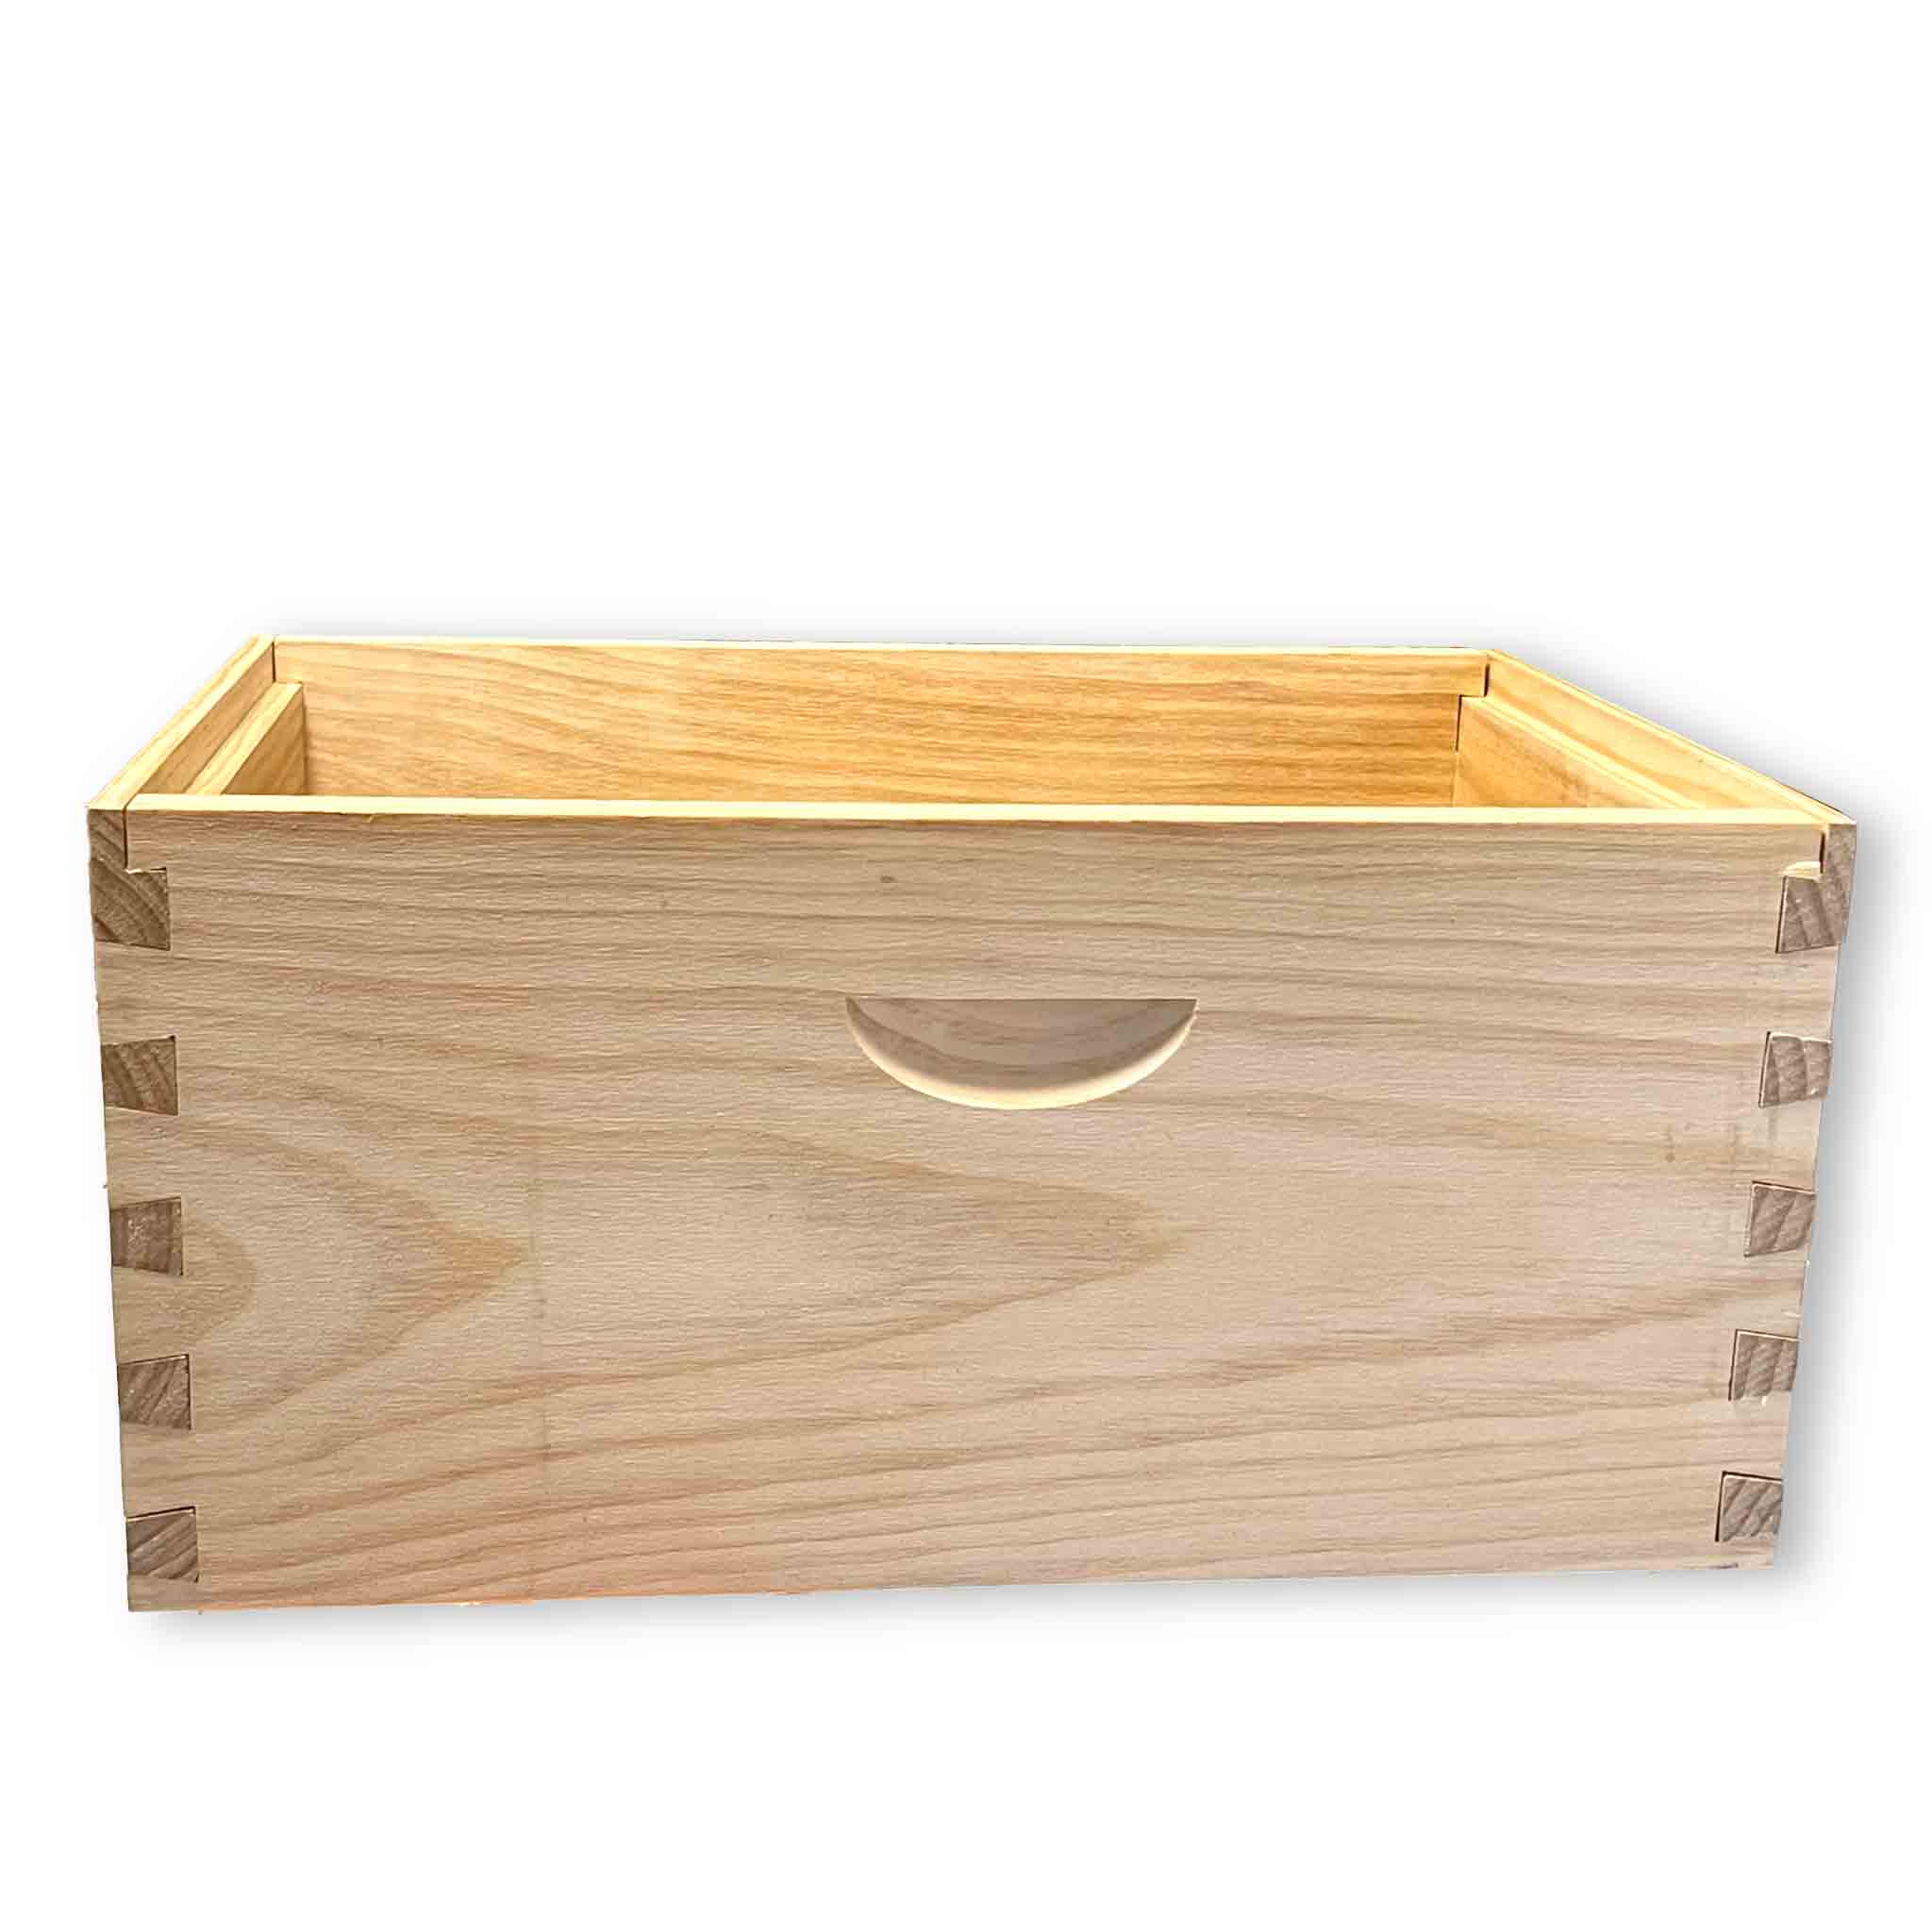 Premium Hot Wax Dipped, Buzzbee Full Deep, Pine Super Box for Flow, Langstroth Beehives - Hive Parts collection by Buzzbee Beekeeping Supplies